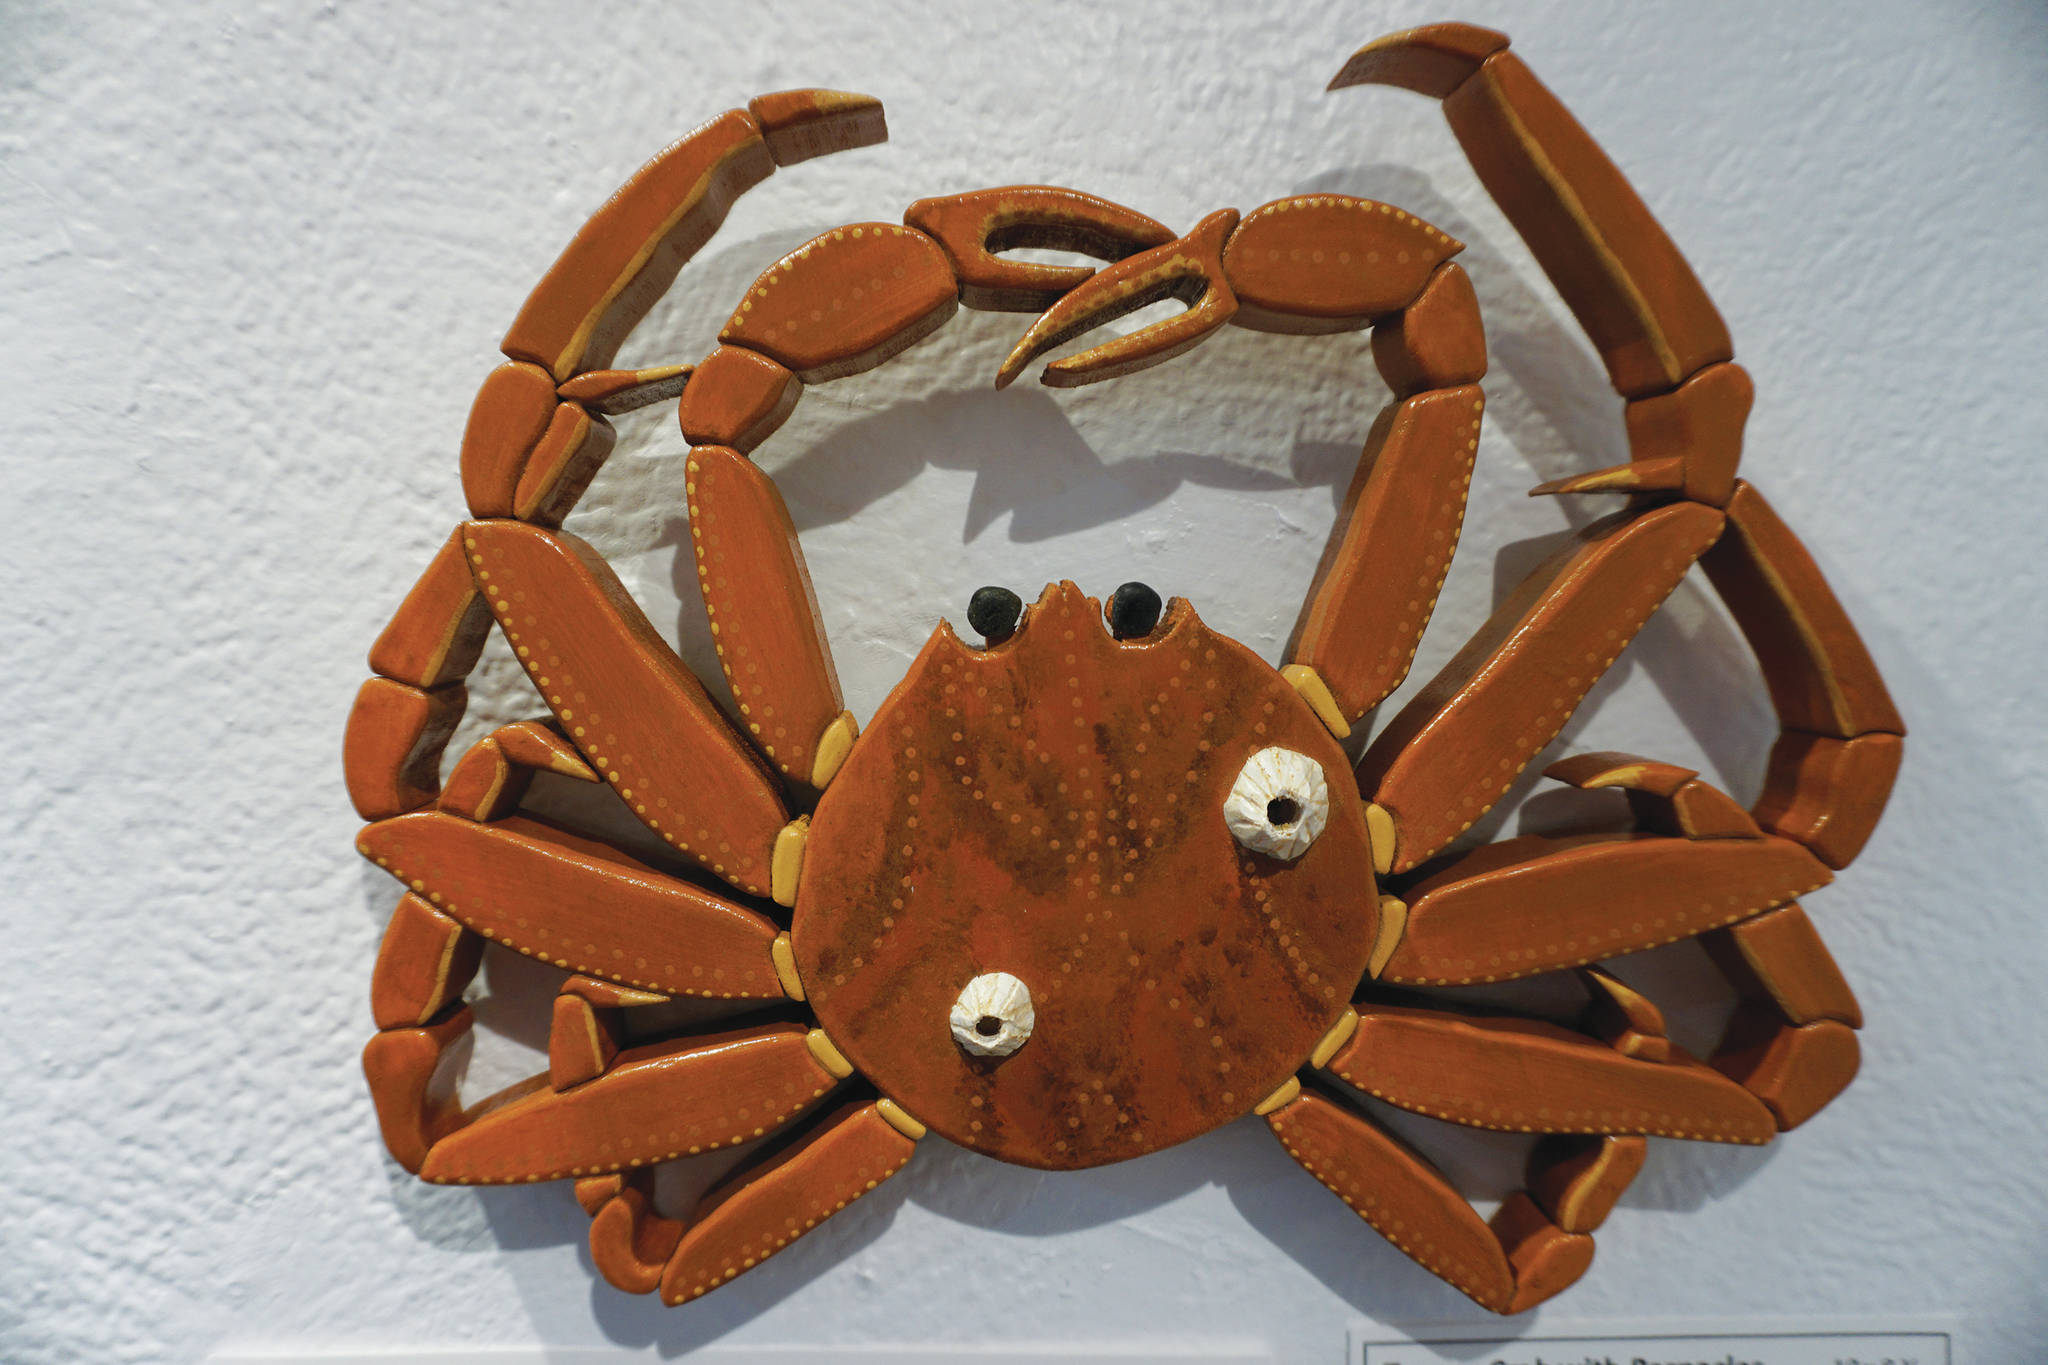 “Tanner Crab with Barnacles” is one of the wood sculptural pieces in Kim Schuster’s exhibit, “Science Observed Through Art: Unsung Species,” as seen here on Friday, Dec. 4, 2020, at Ptarmigan Arts in Homer, Alaska. (Photo by Michael Armstrong/Homer News)